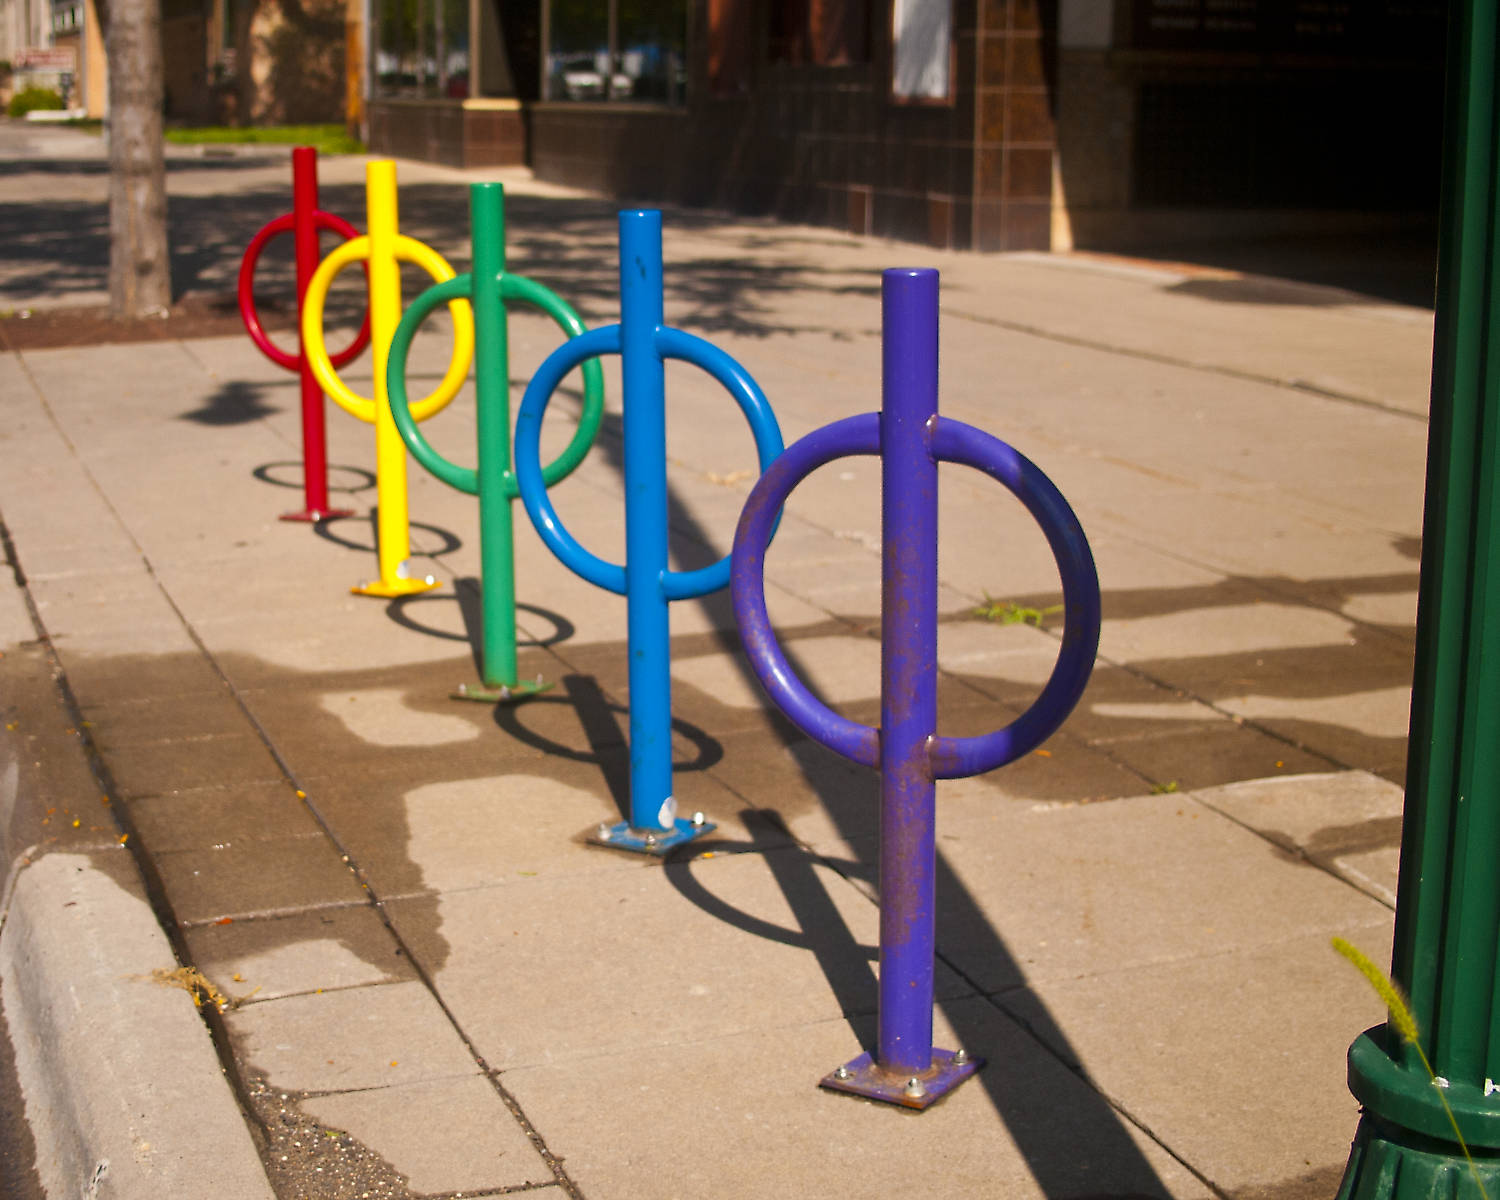 Row of bike lock posts on a sidewalk in different bright colors: purple, blue, green, yellow, and red.